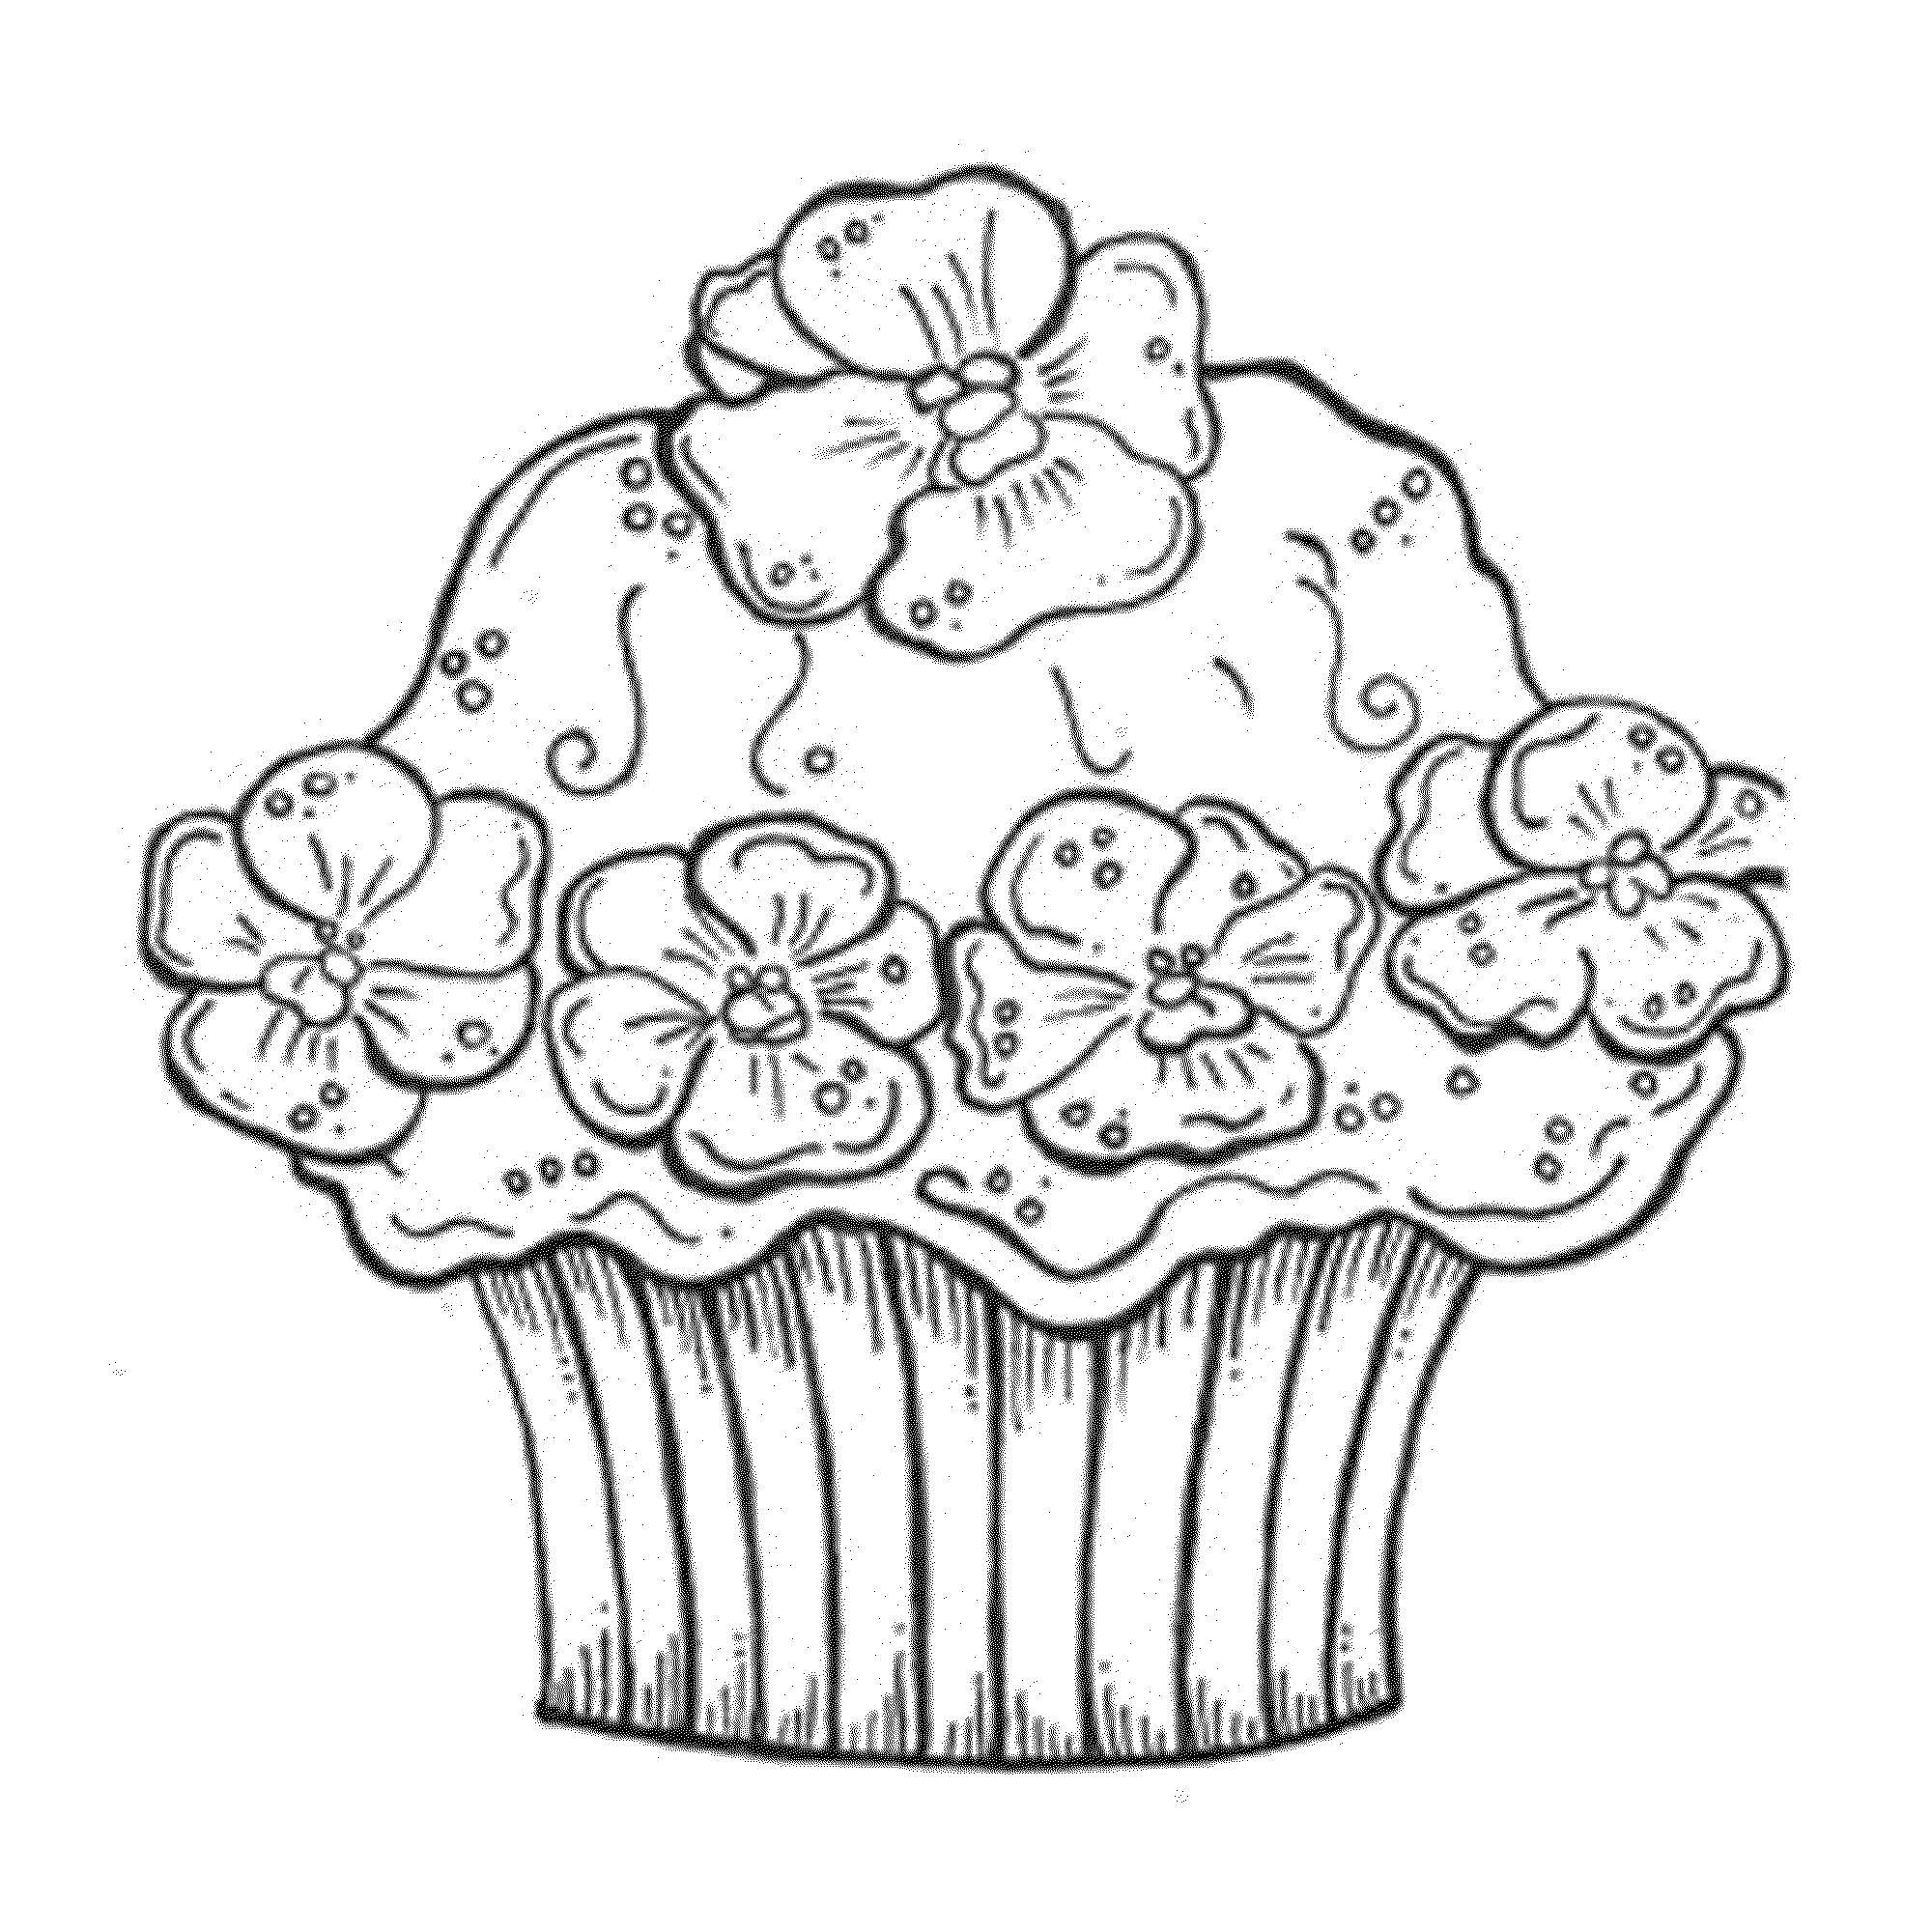 Coloring Cupcake with flowers. Category sweets. Tags:  Sweets.